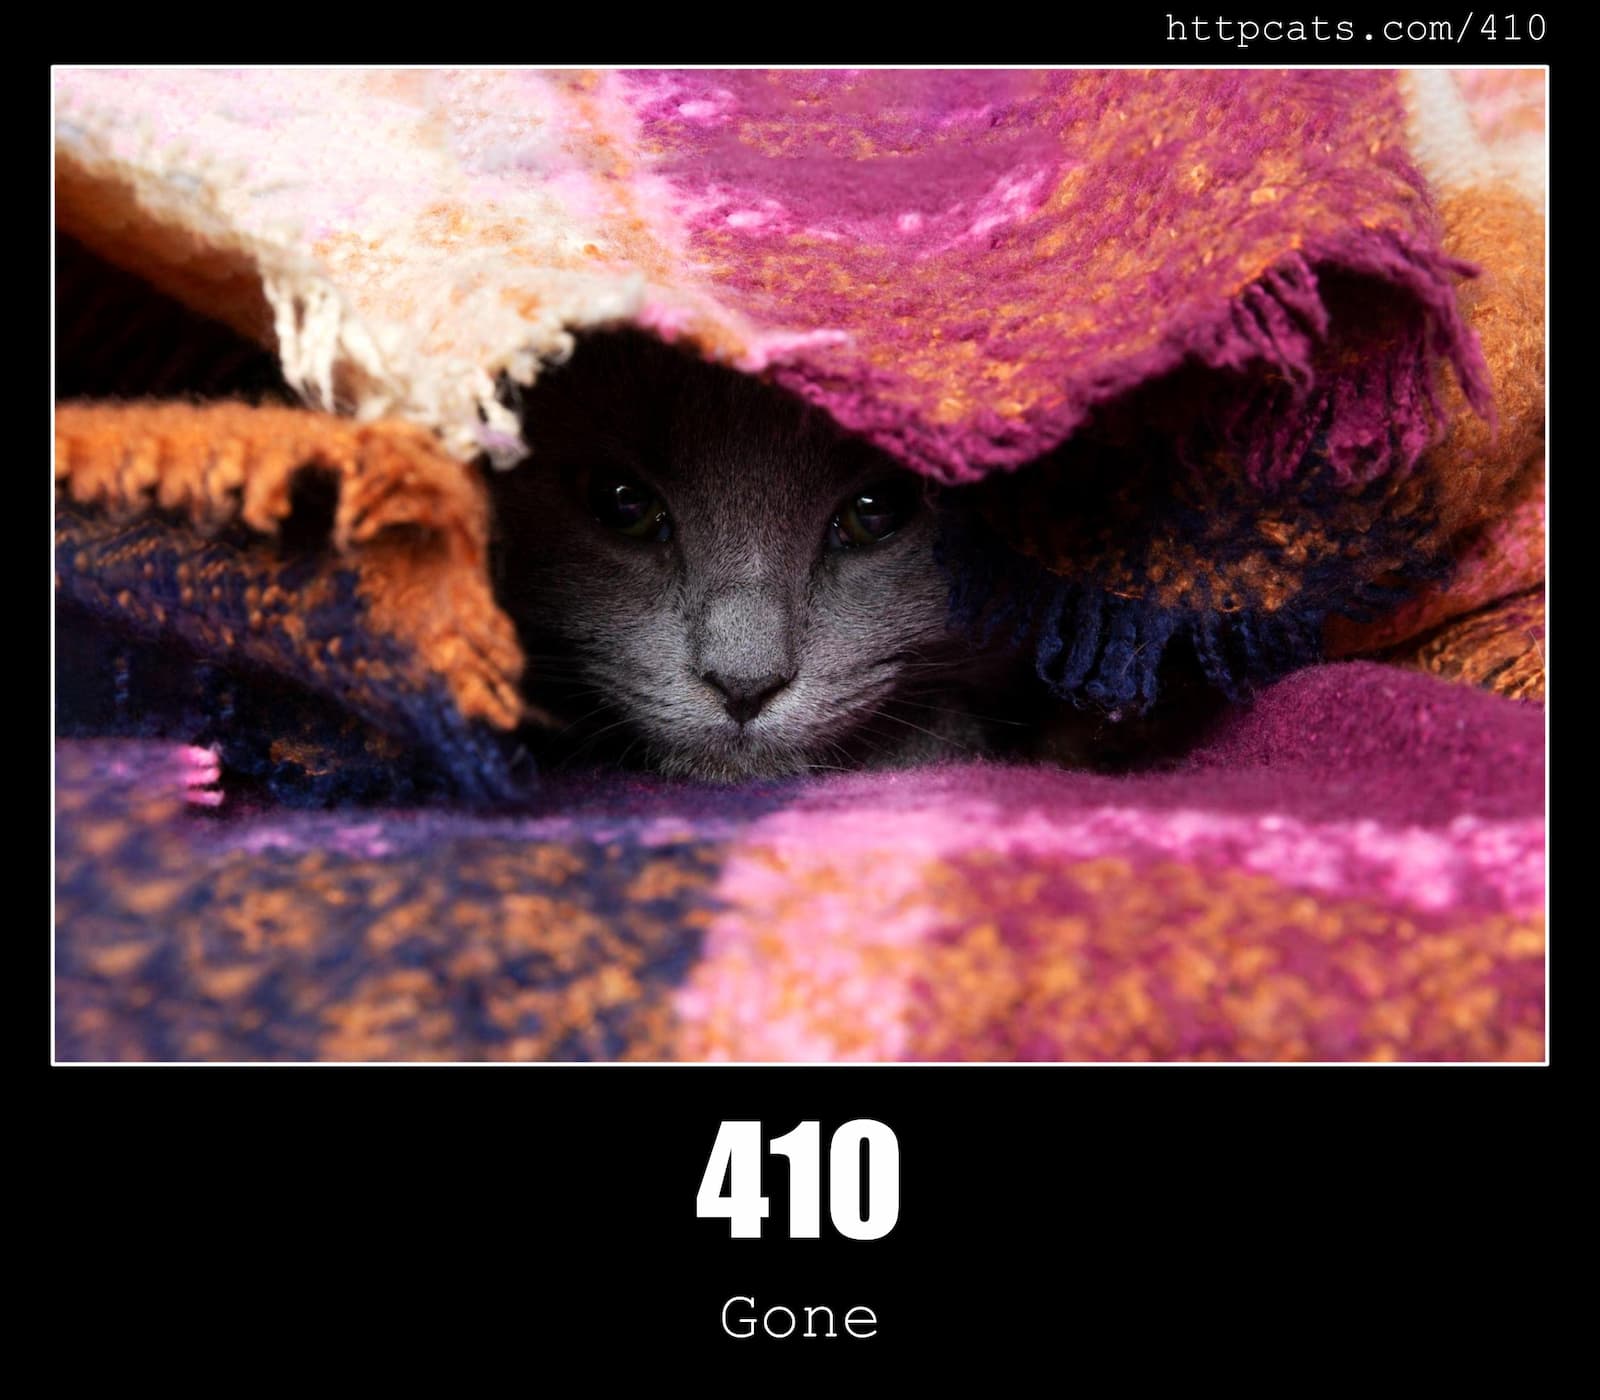 HTTP Status Code 410 Gone & Cats